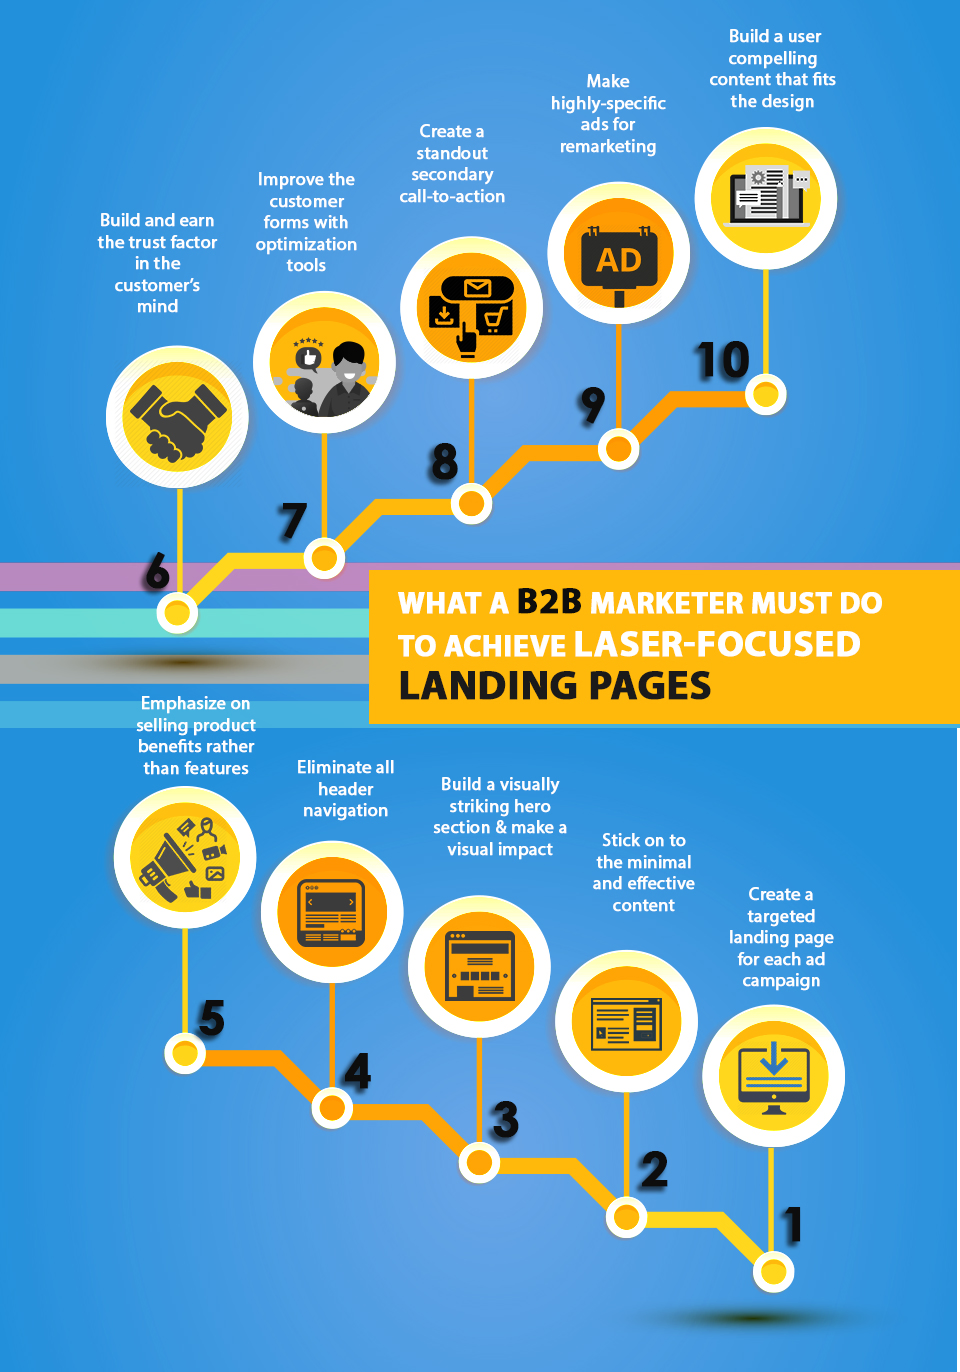 B2B marketer must do to achieve laser-focused landing pages